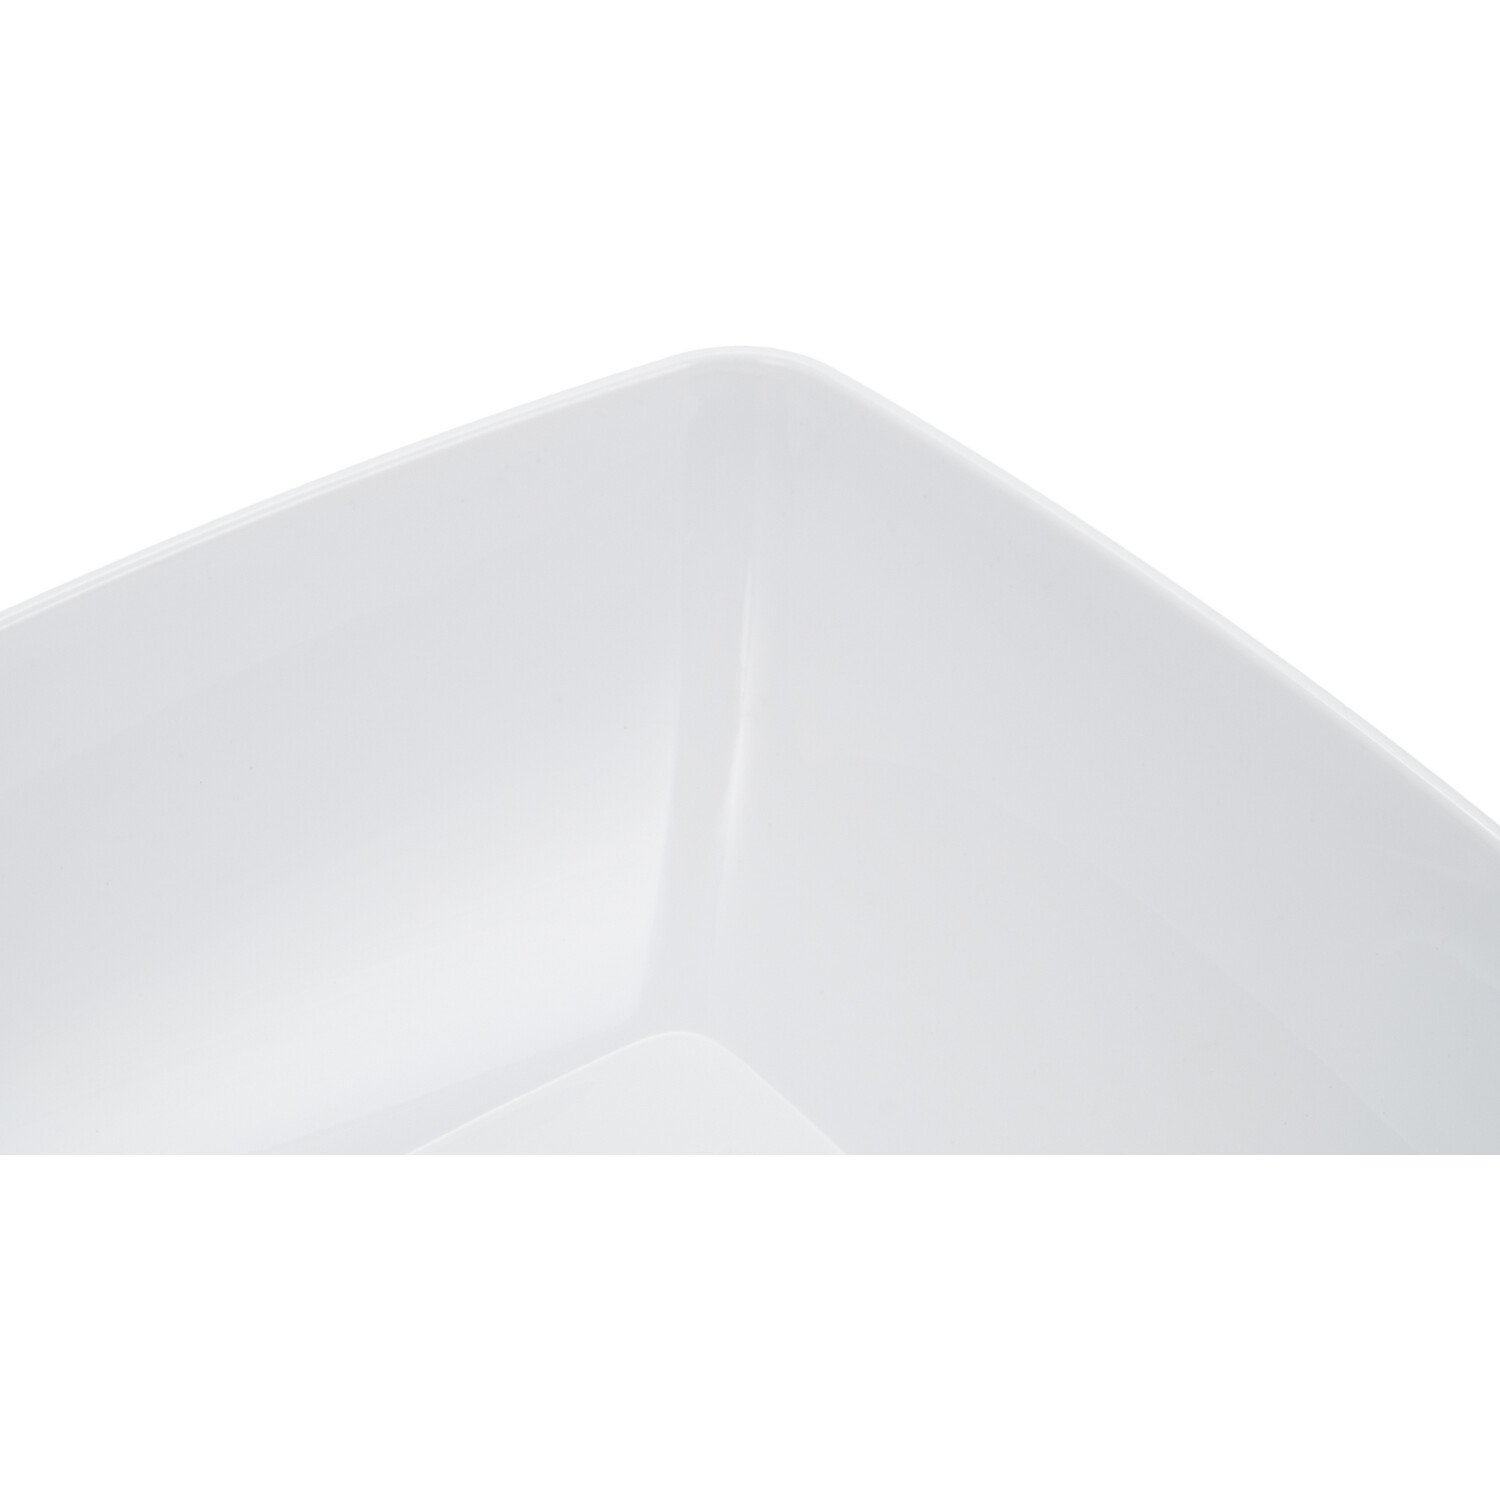 Pack of 2 My Home Square Bowls - White Image 2